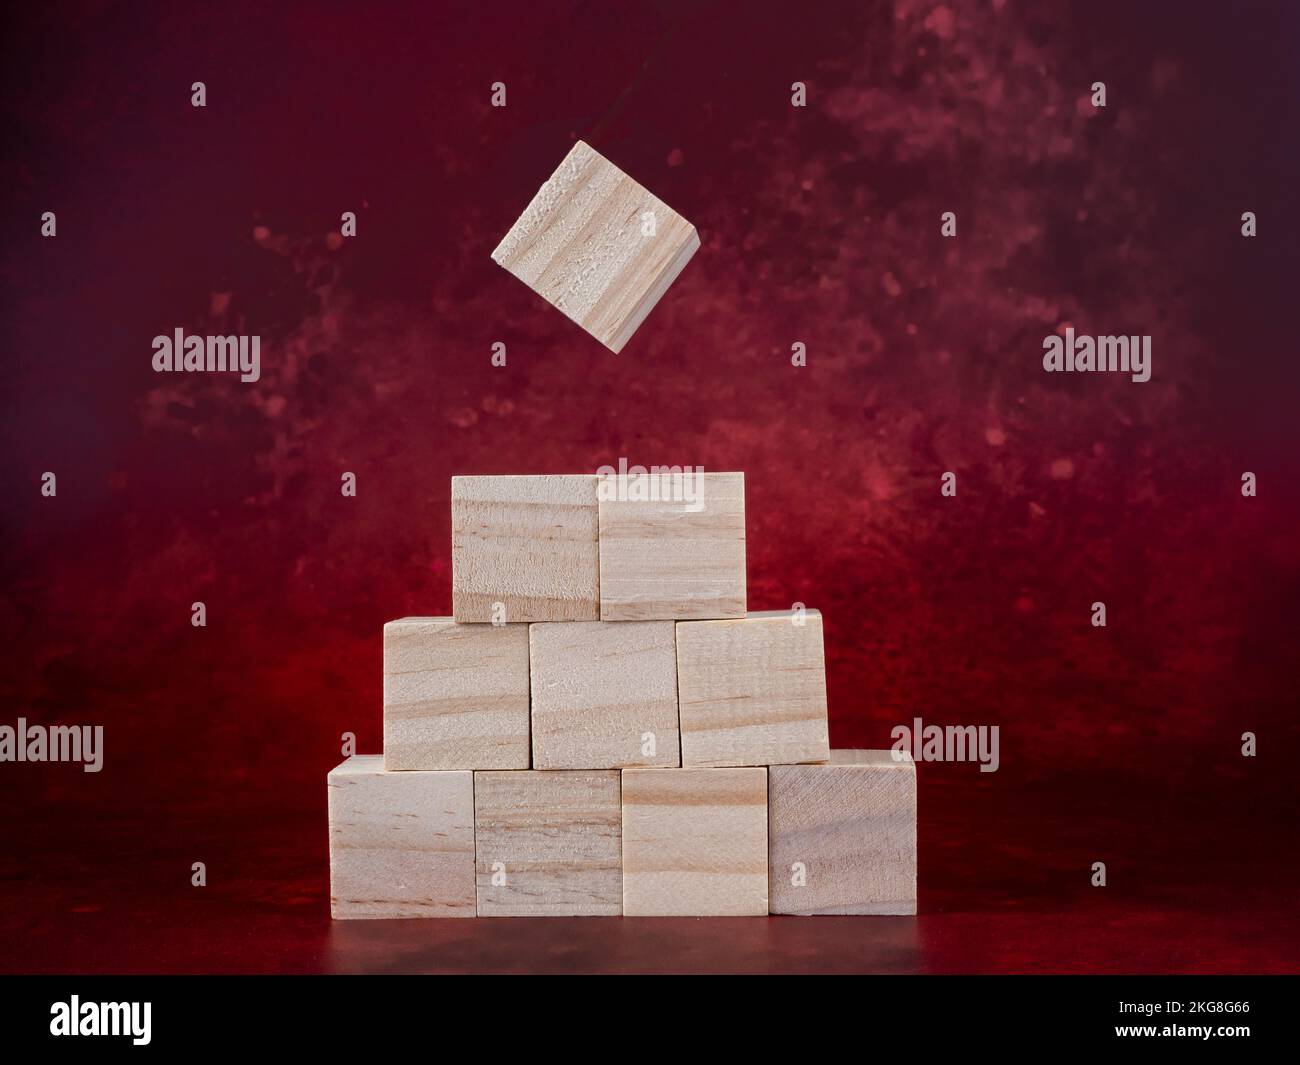 blank wooden blocks ready for graphics on a dark red background Stock Photo